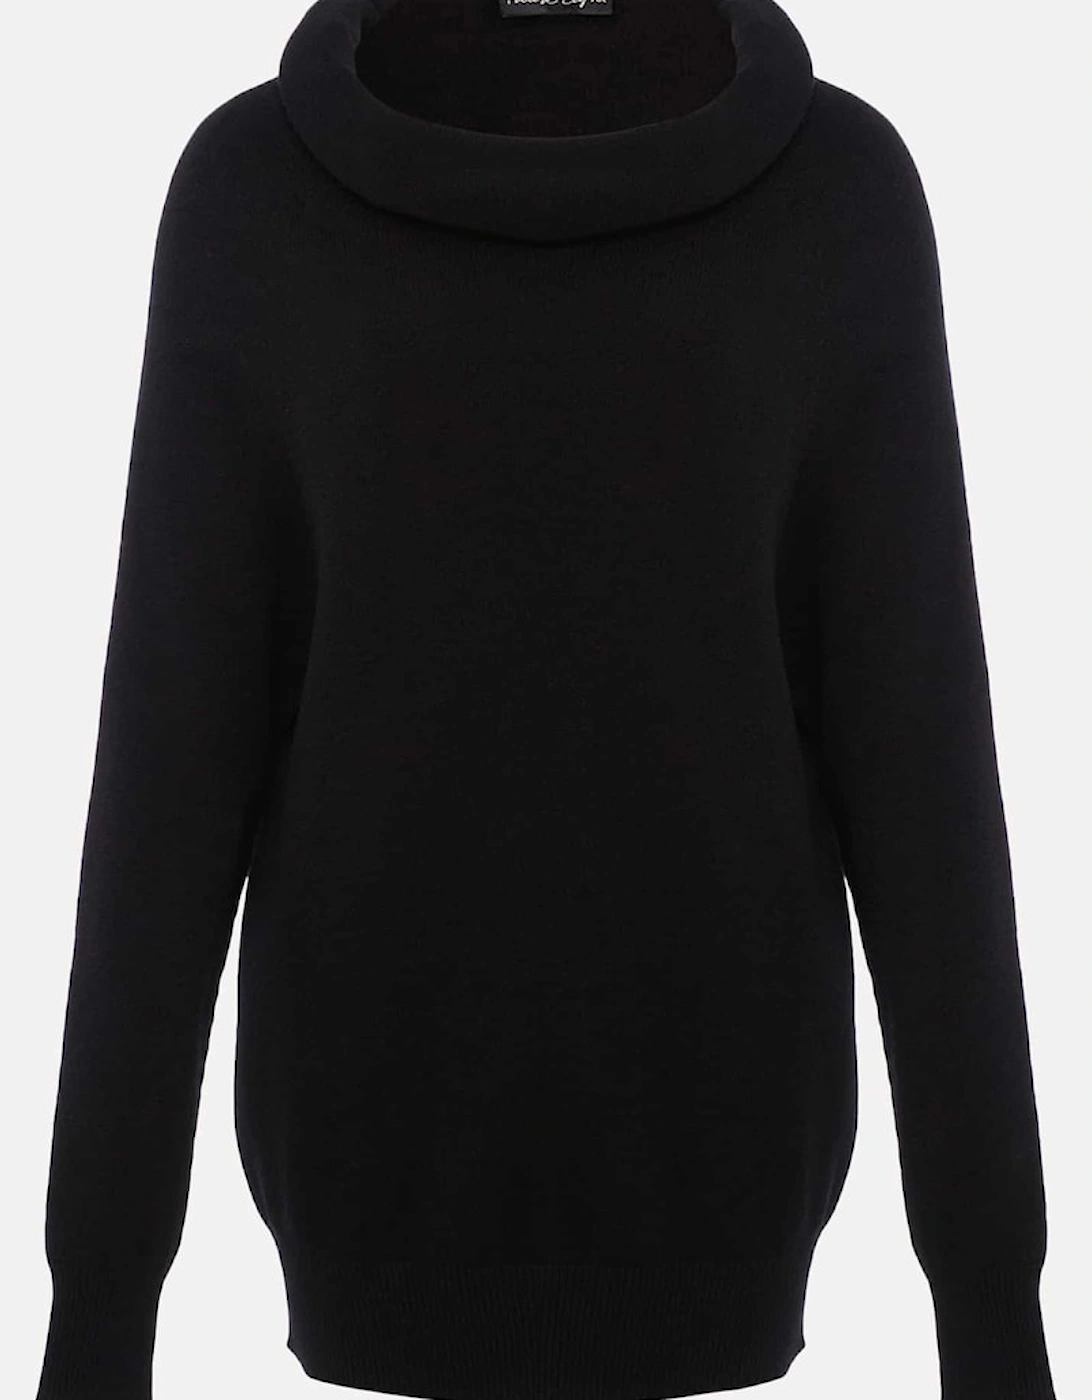 Rylee Roll Neck Knit